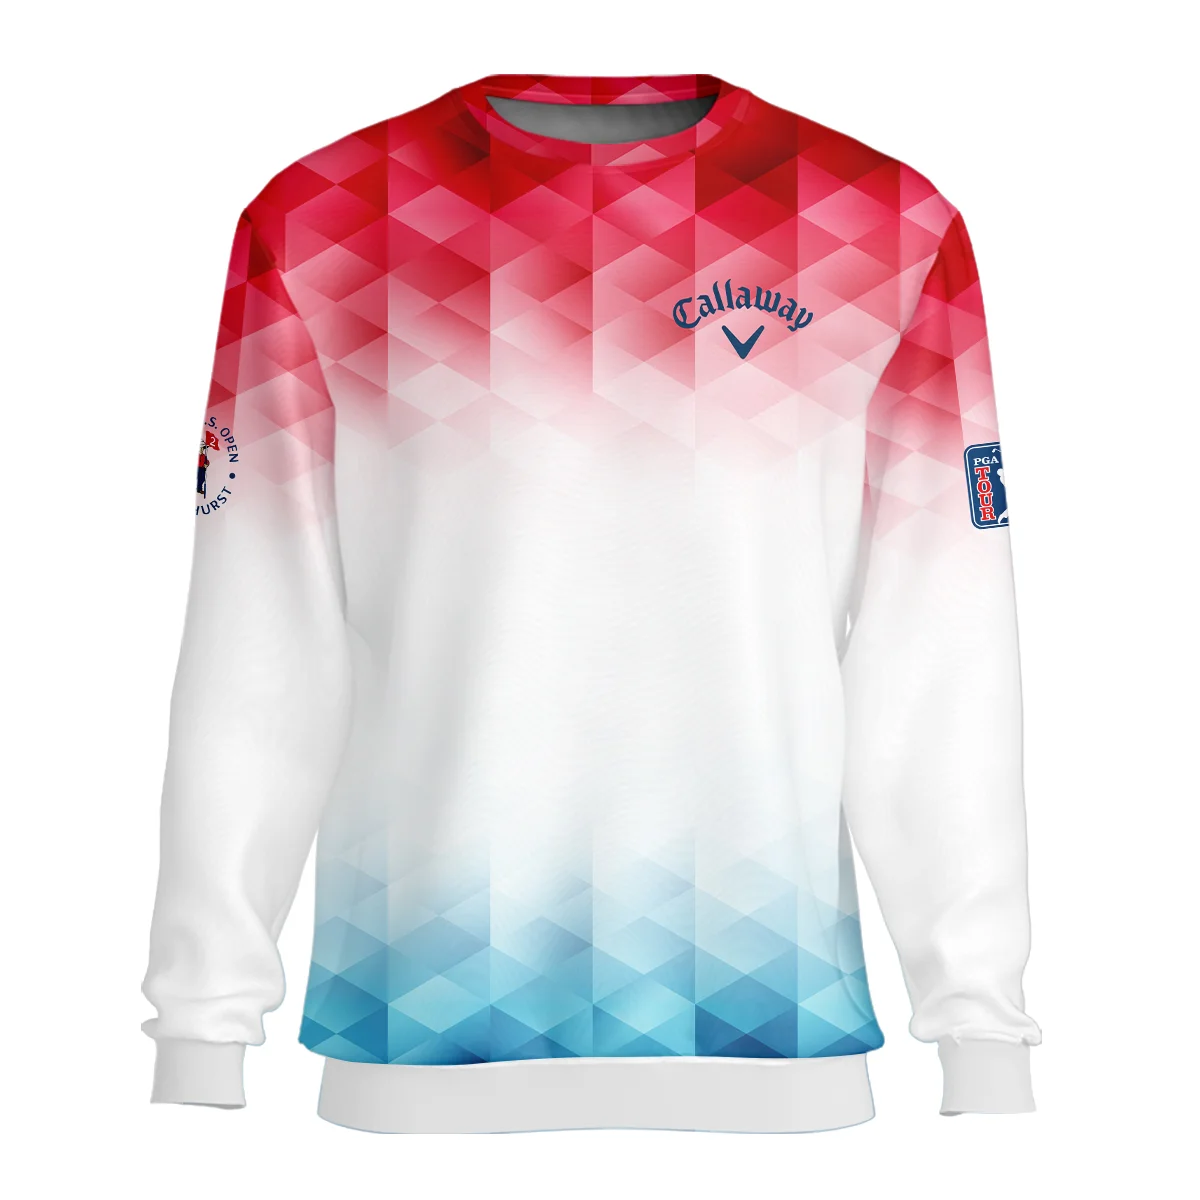 124th U.S. Open Pinehurst Callaway Golf Sport Bomber Jacket Blue Red Abstract Geometric Triangles All Over Print Bomber Jacket